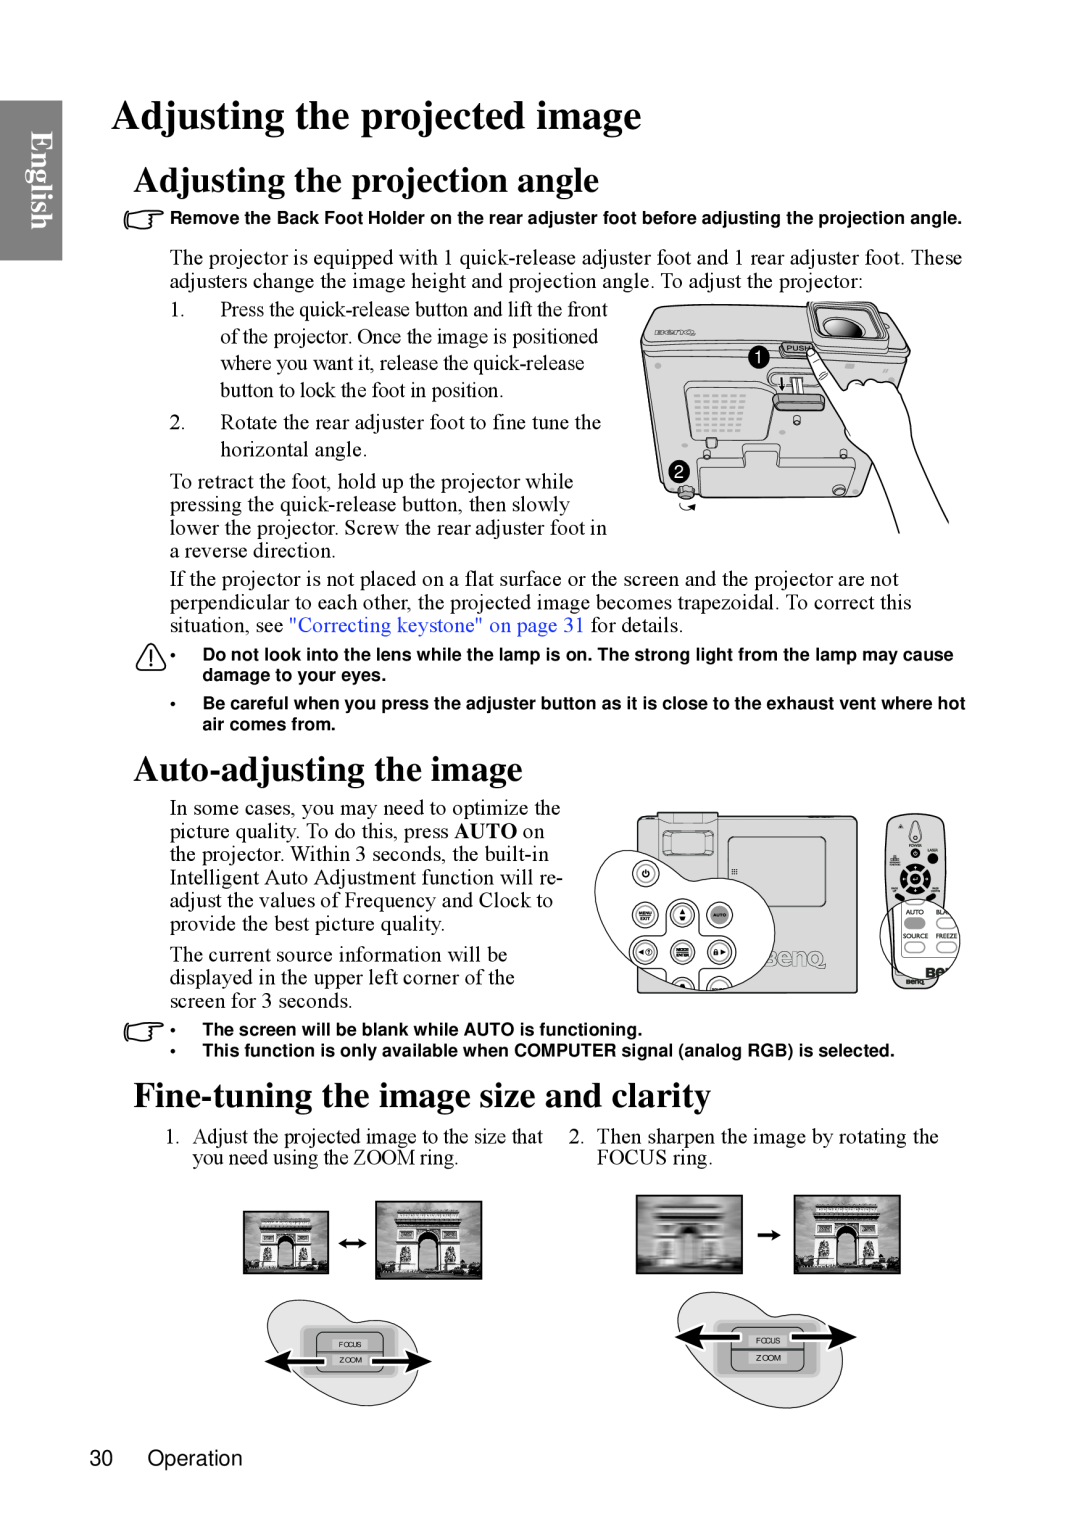 BenQ SP840 user manual Adjusting the projected image, Adjusting the projection angle, Auto-adjusting the image, English 